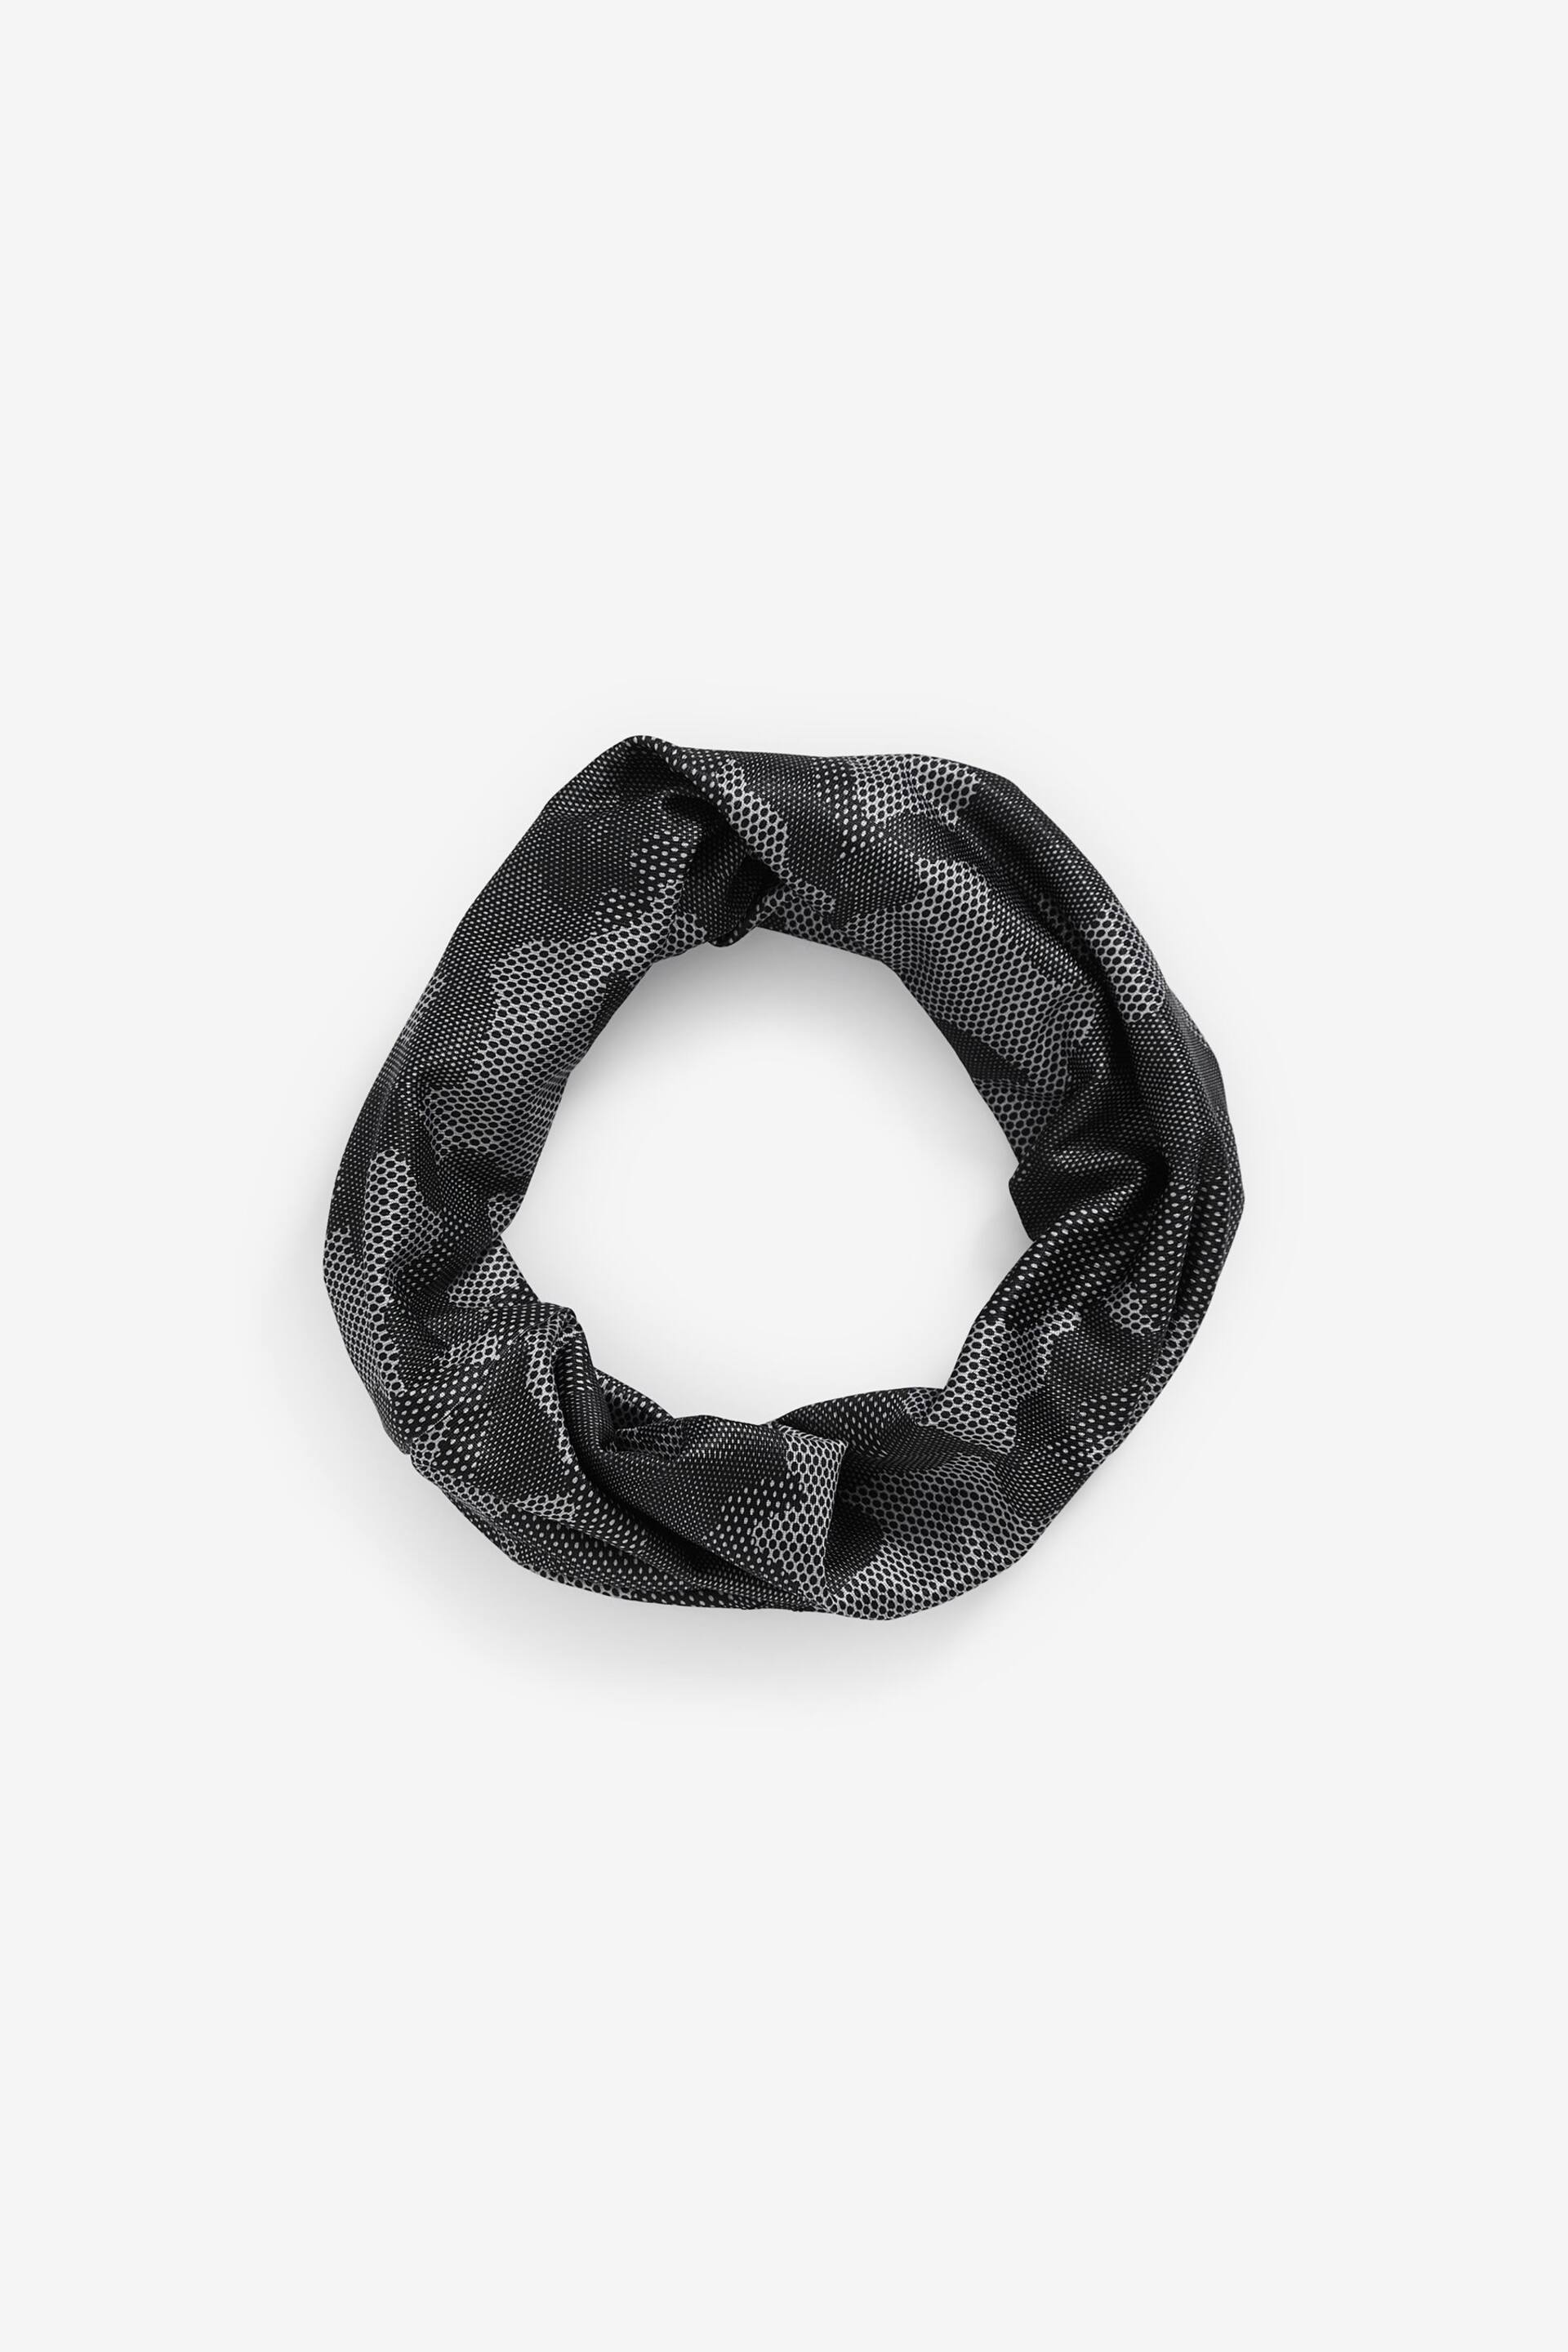 Camouflage Print Neck Warmer Snood - Image 2 of 4